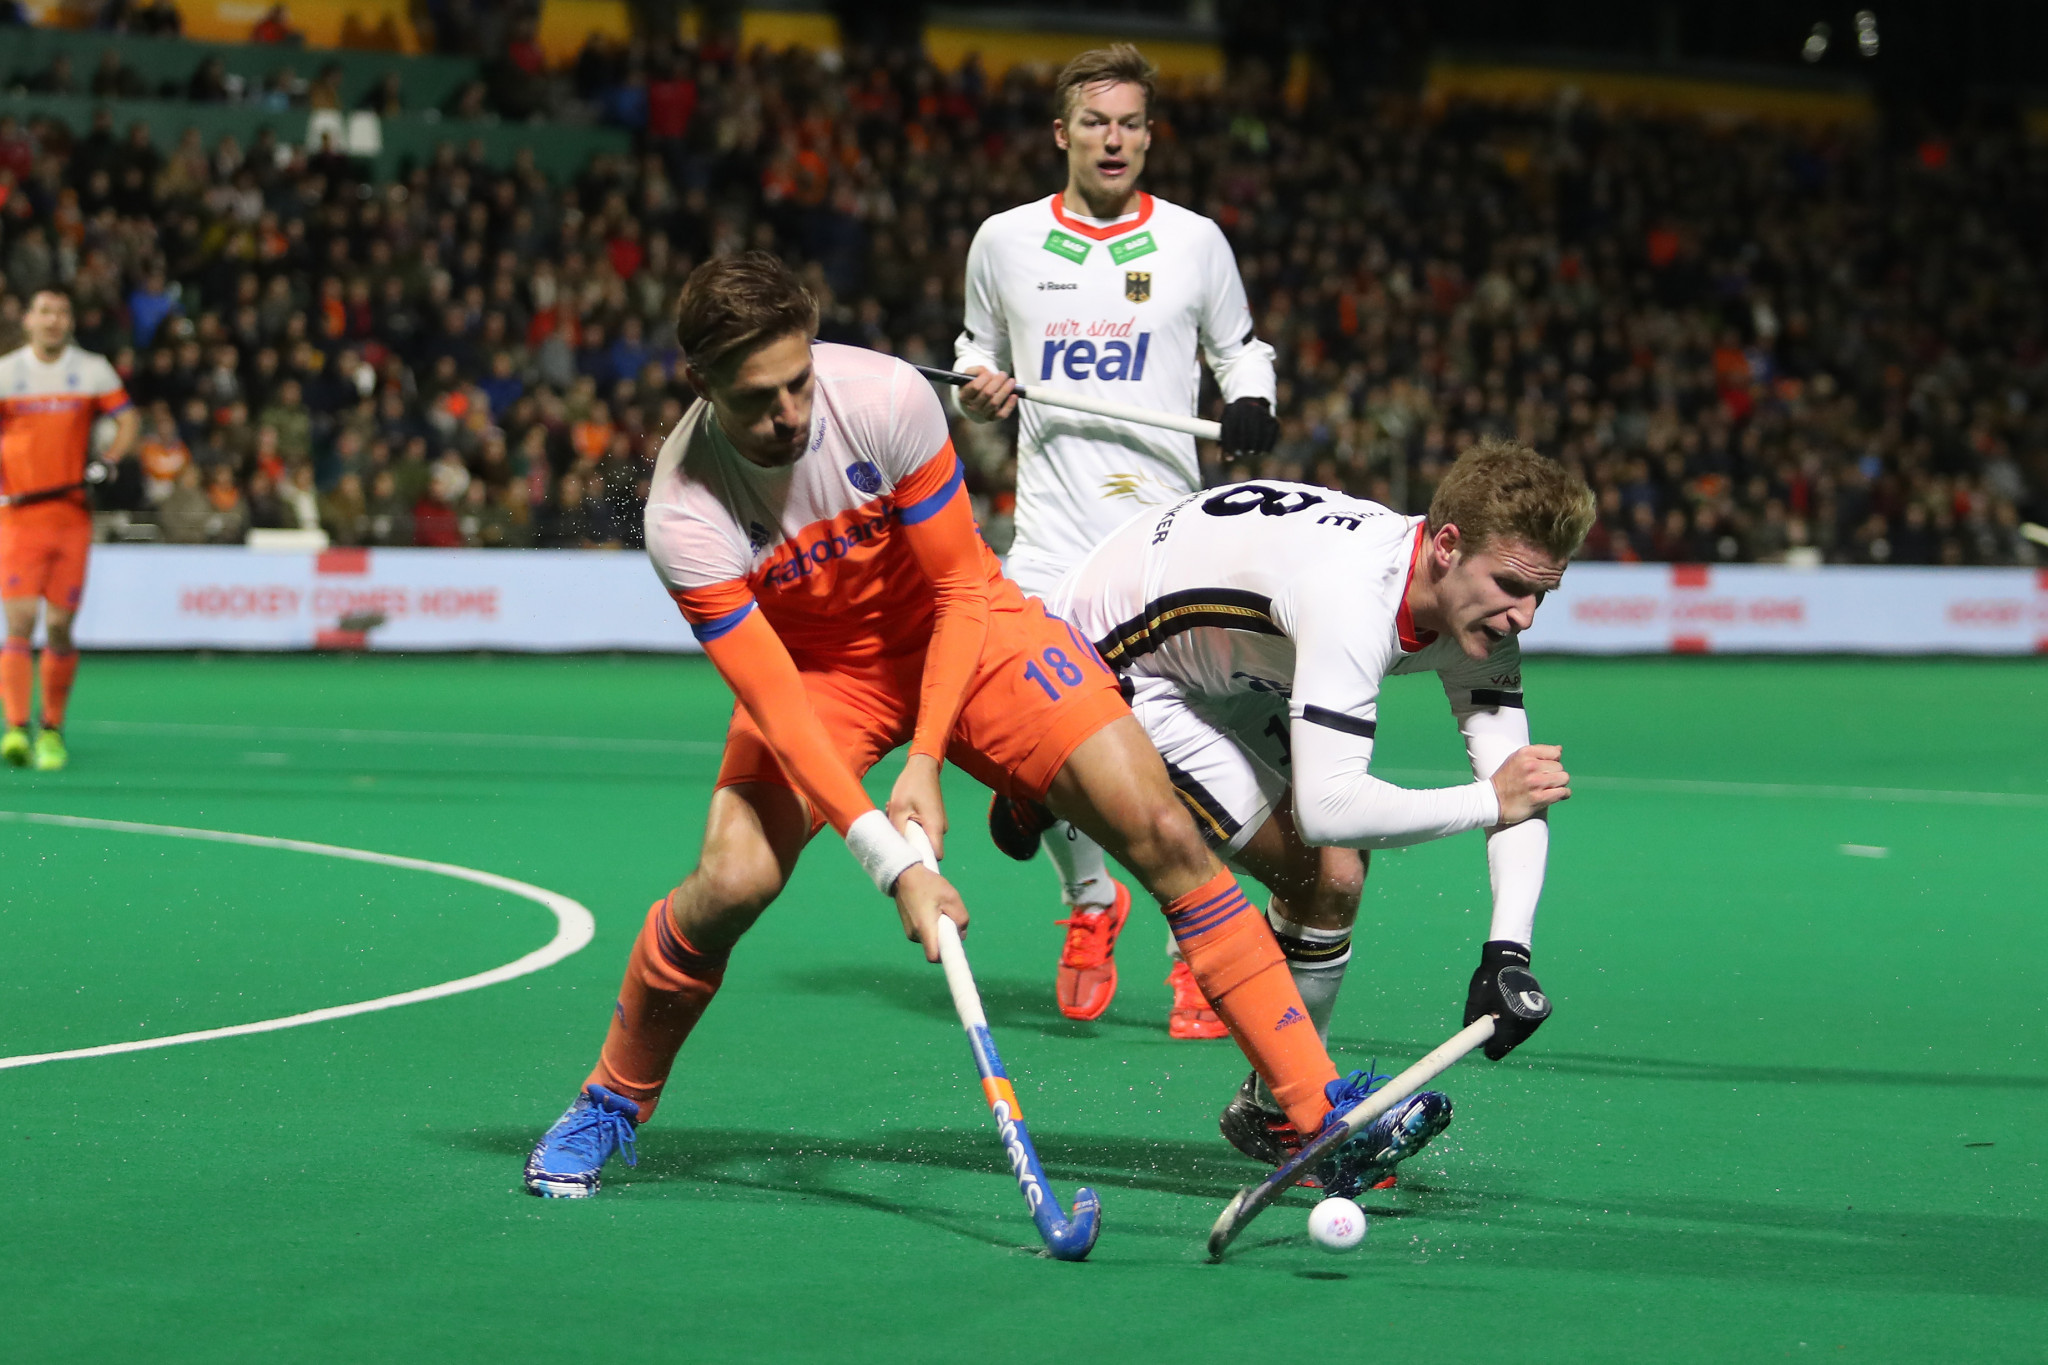 Germany withheld severe Dutch pressure to earn a 1-0 win in Rotterdam ©Getty Images